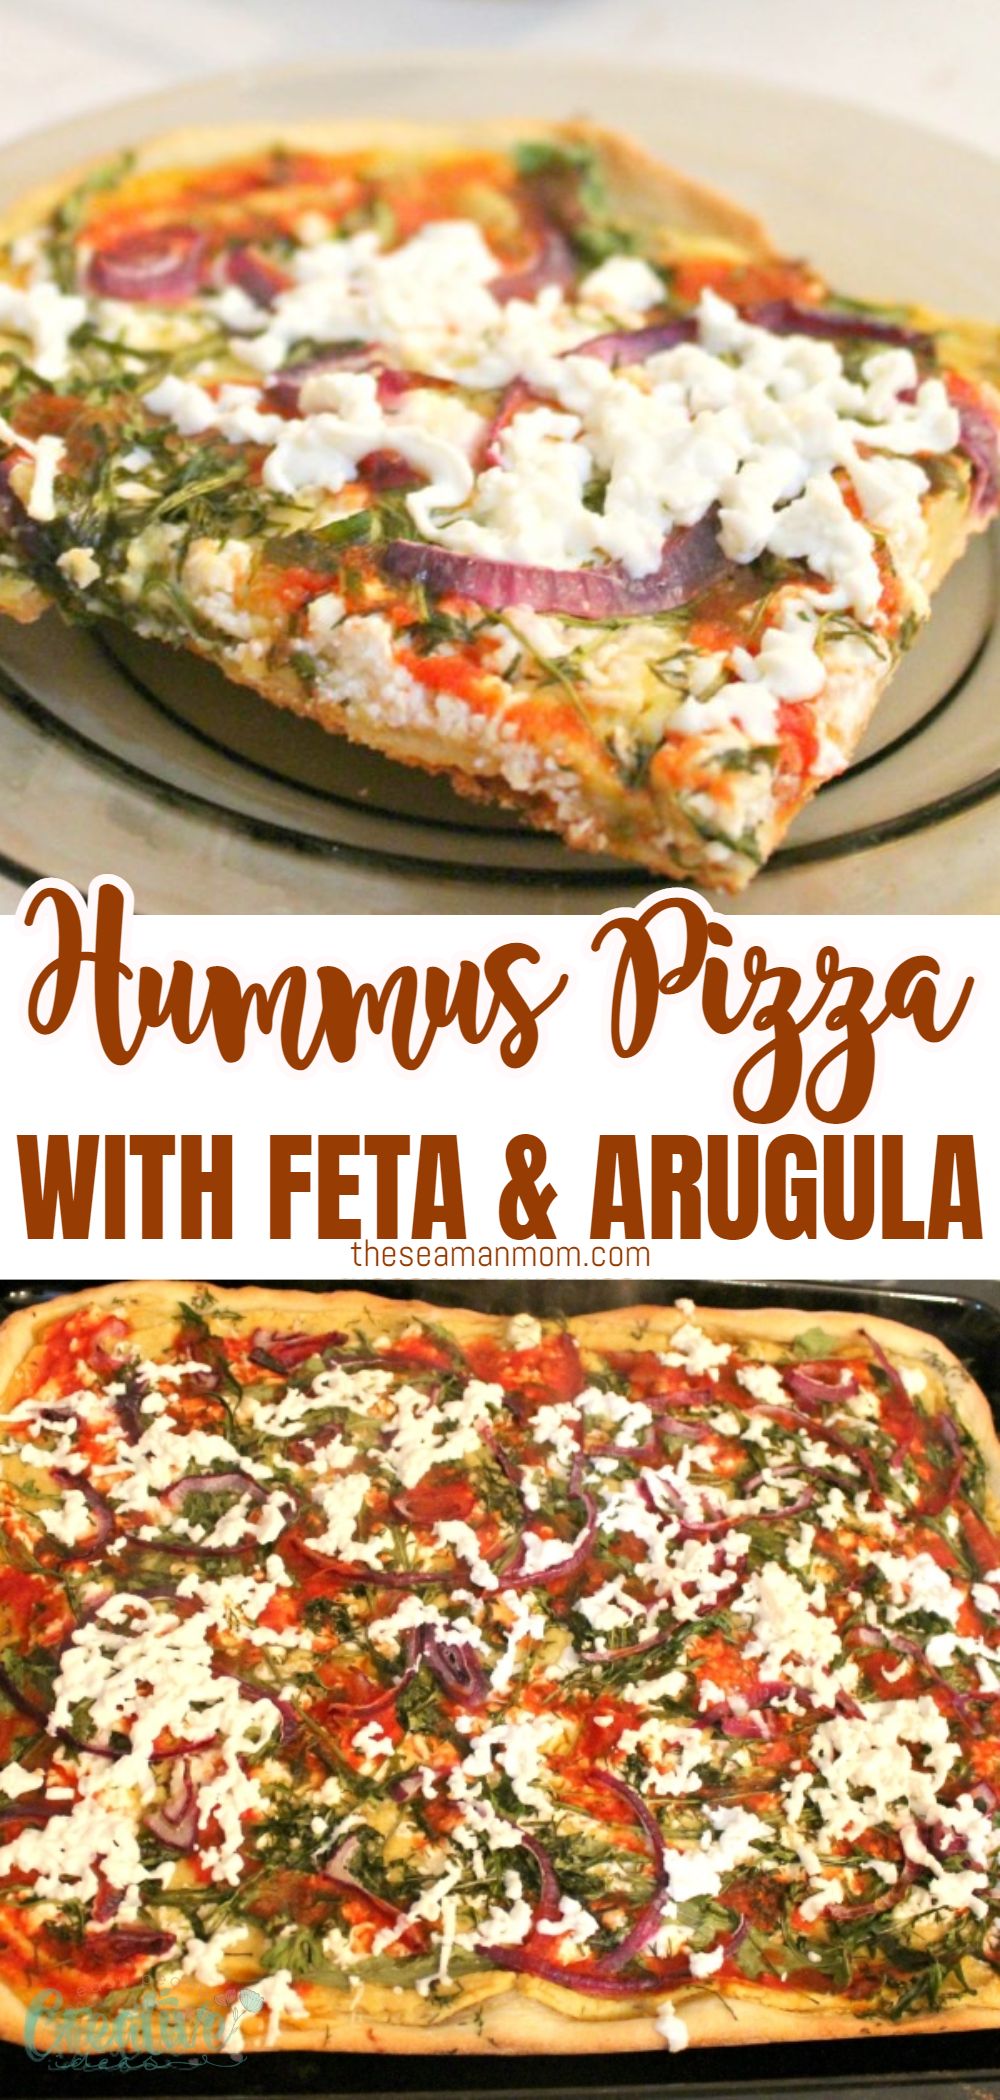 Looking for a vegetarian pizza recipe that easy to make at home? This delicious hummus pizza uses healthy, delicious ingredients and comes together in no time!  via @petroneagu